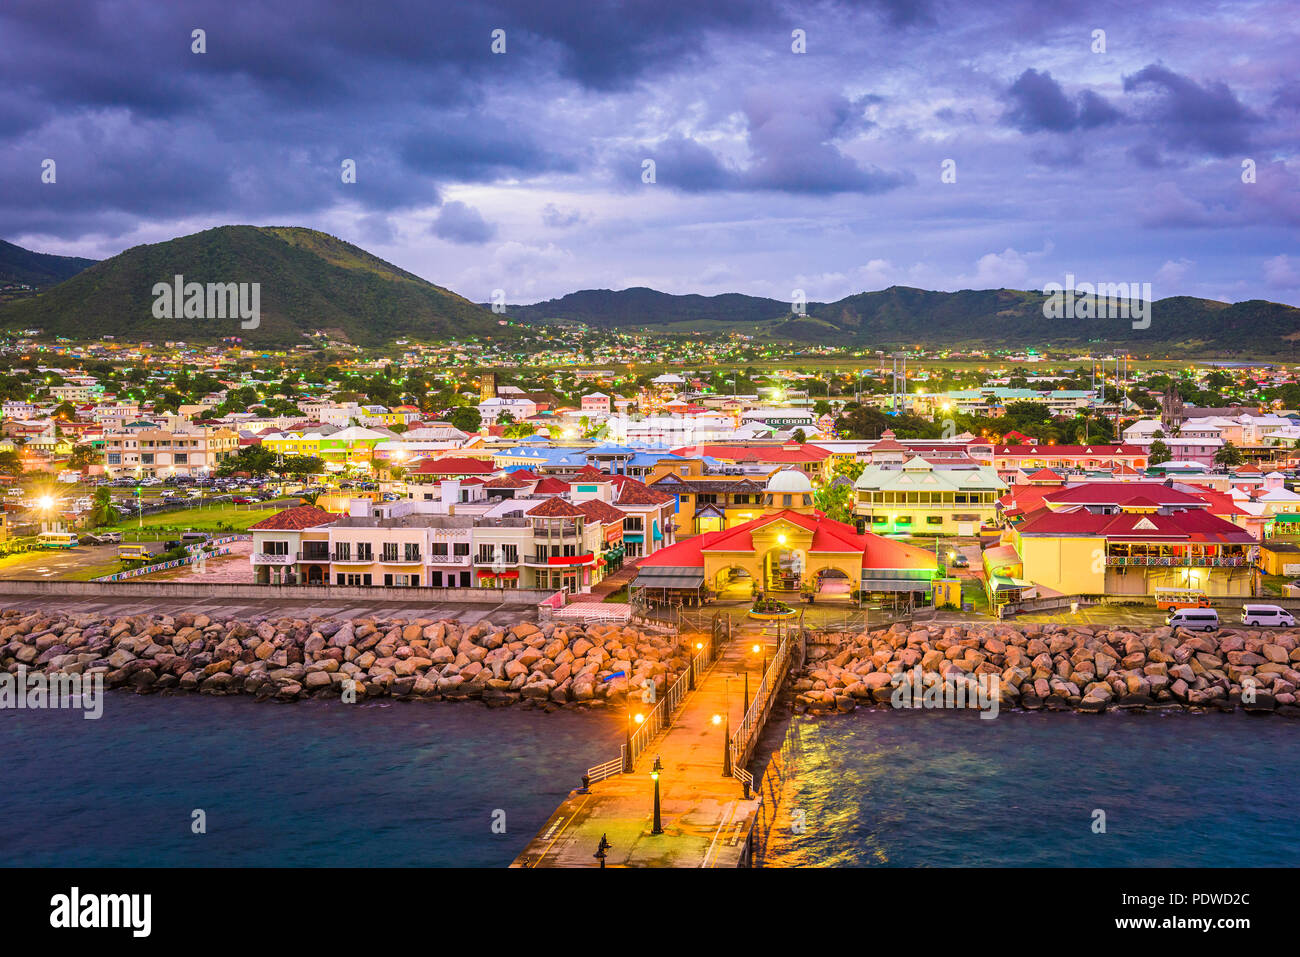 Basseterre, St. Kitts and Nevis town skyline at the port. Stock Photo